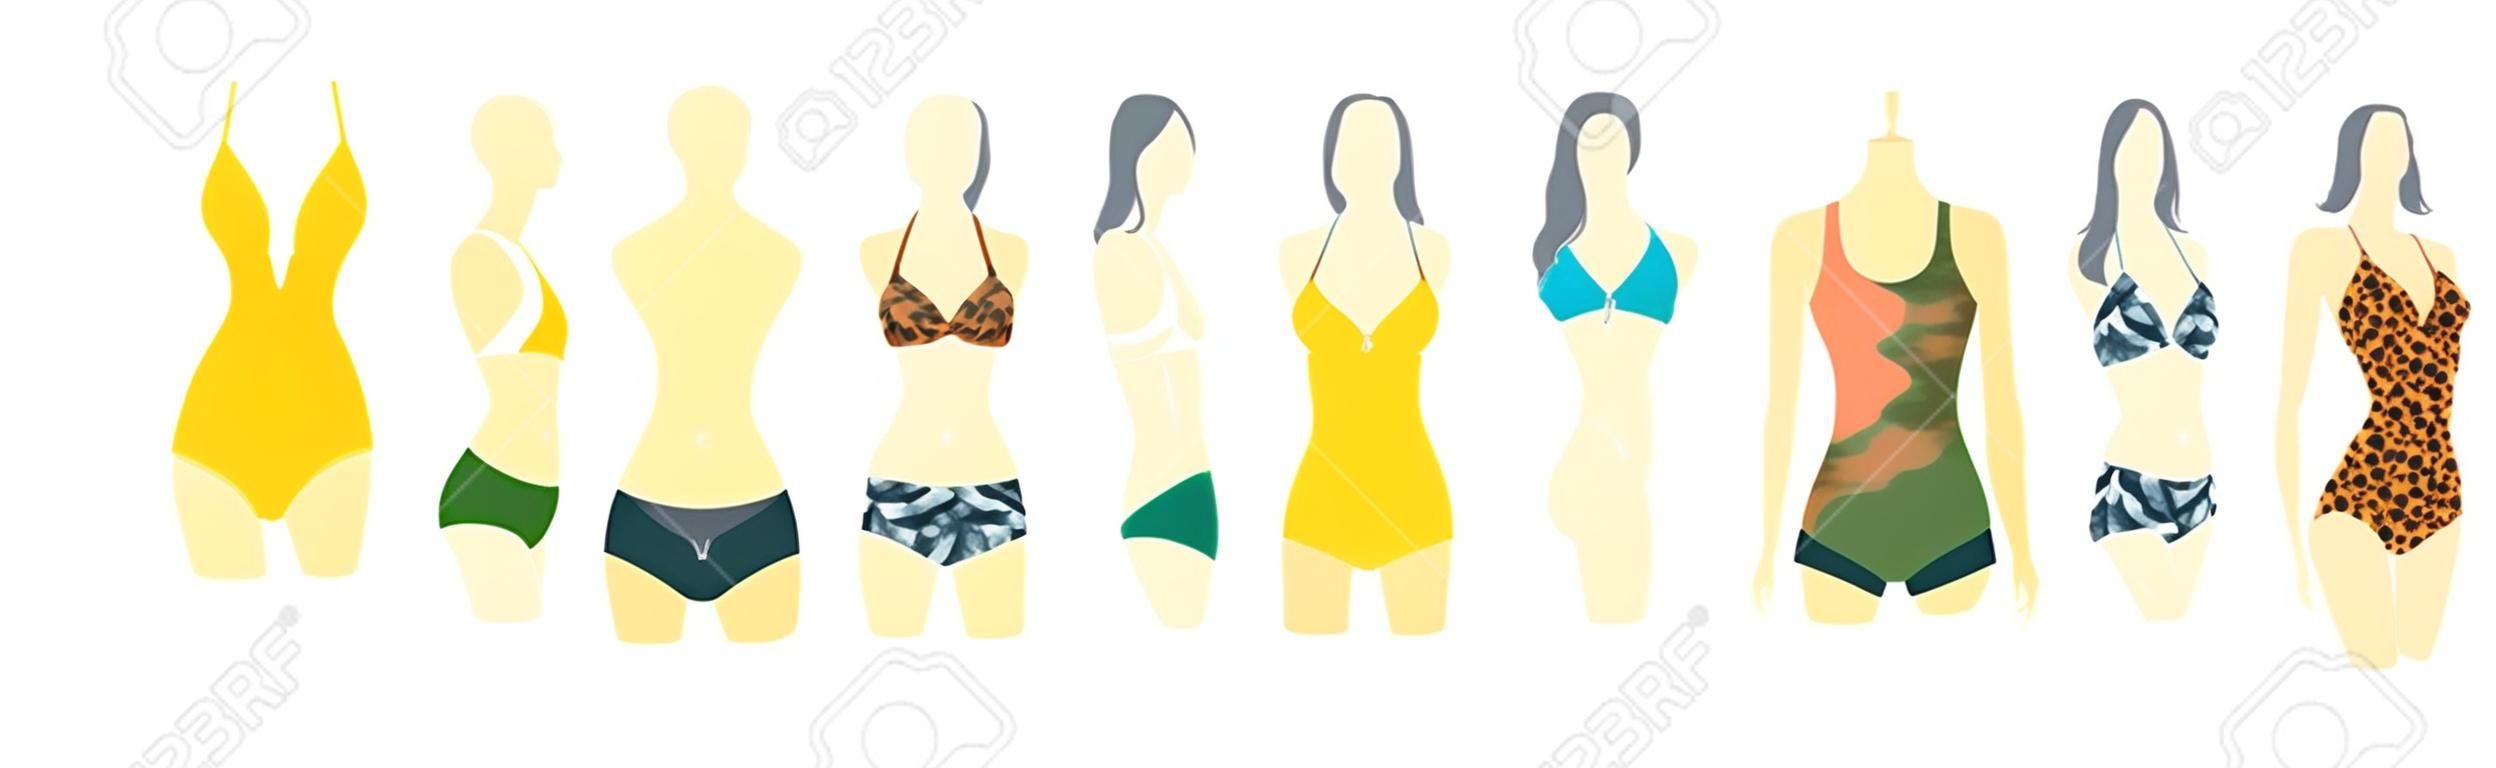 Set of female swimsuit icons. Different types of colorful beachwear silhouettes isolated on white